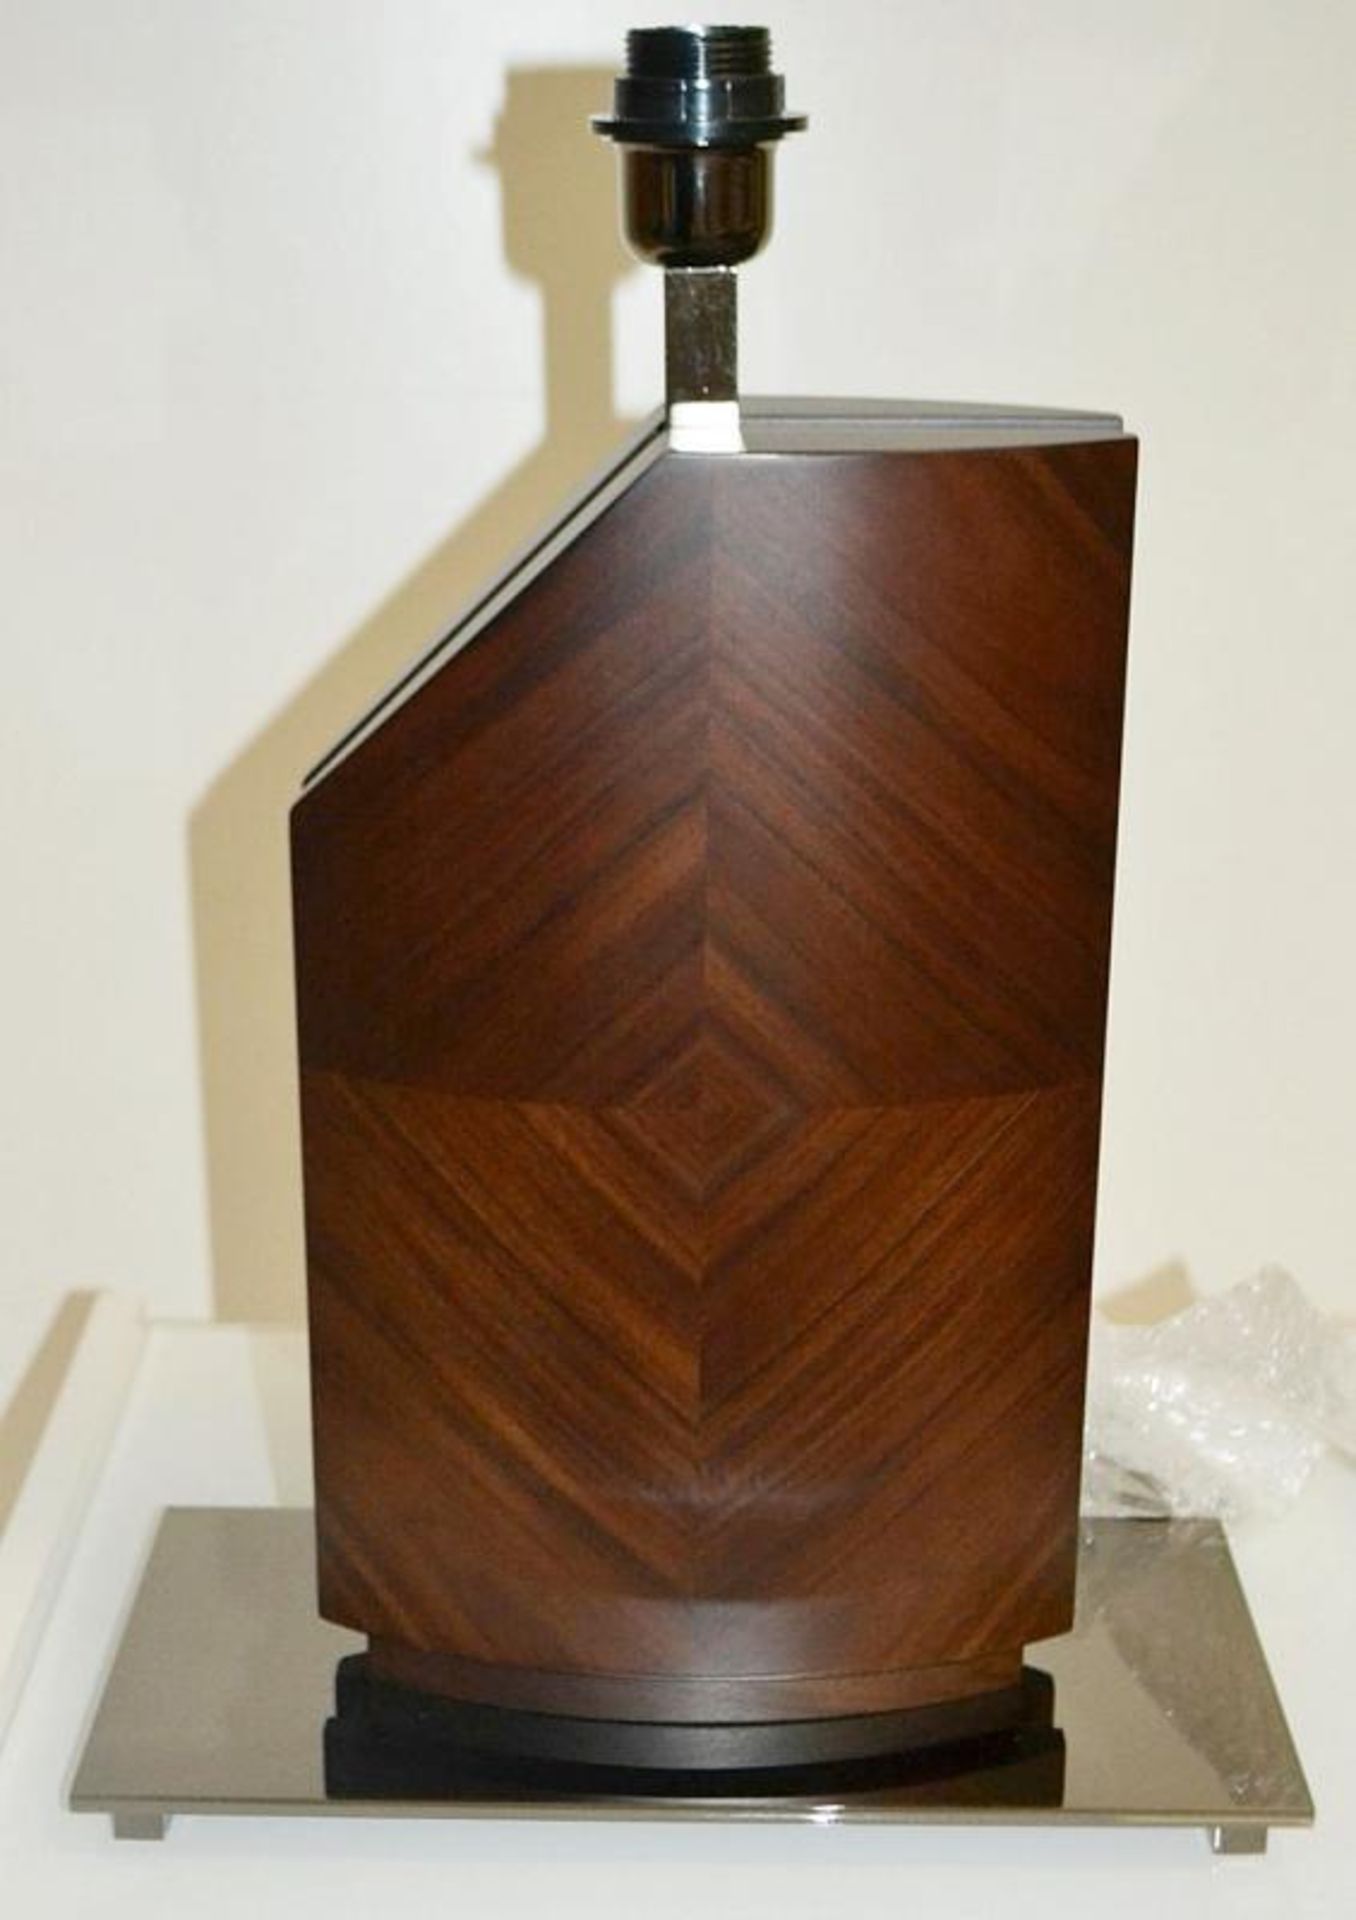 1 x SMANIA 'Wi' Italian Luxury Wooden Table Lamp - Ref: 6078342 P2/19 - CL087 - Location: Altrincham - Image 5 of 10